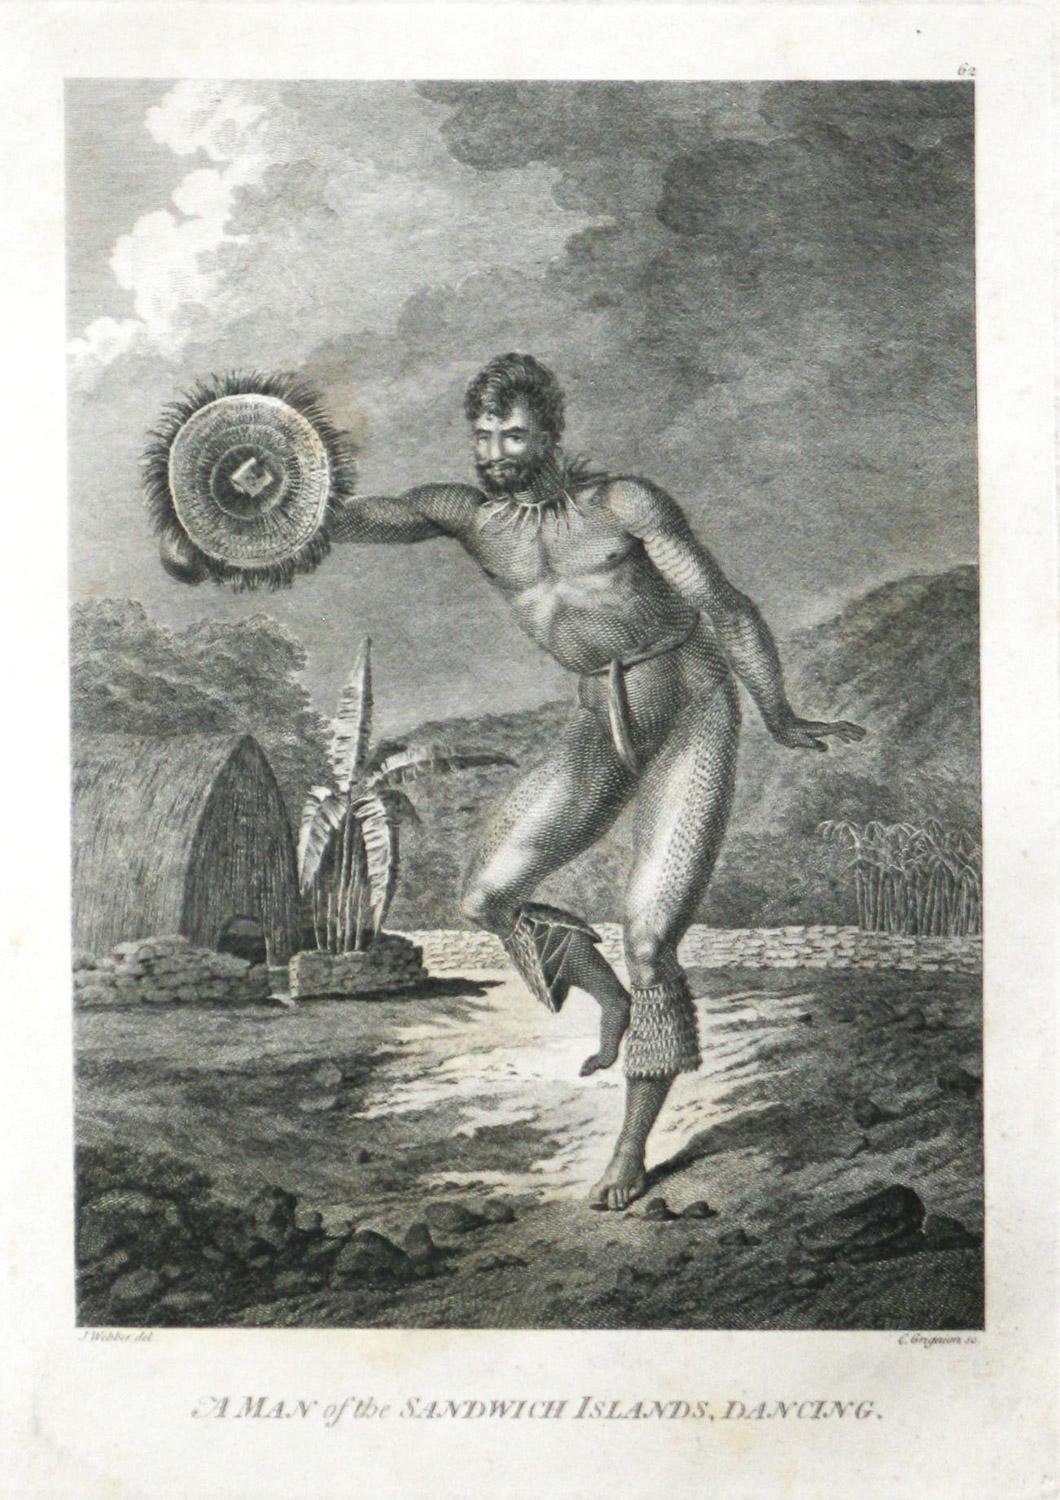 A Man of the Sandwich Islands, Dancing (Hawaii) from Captain Cooks travels engra